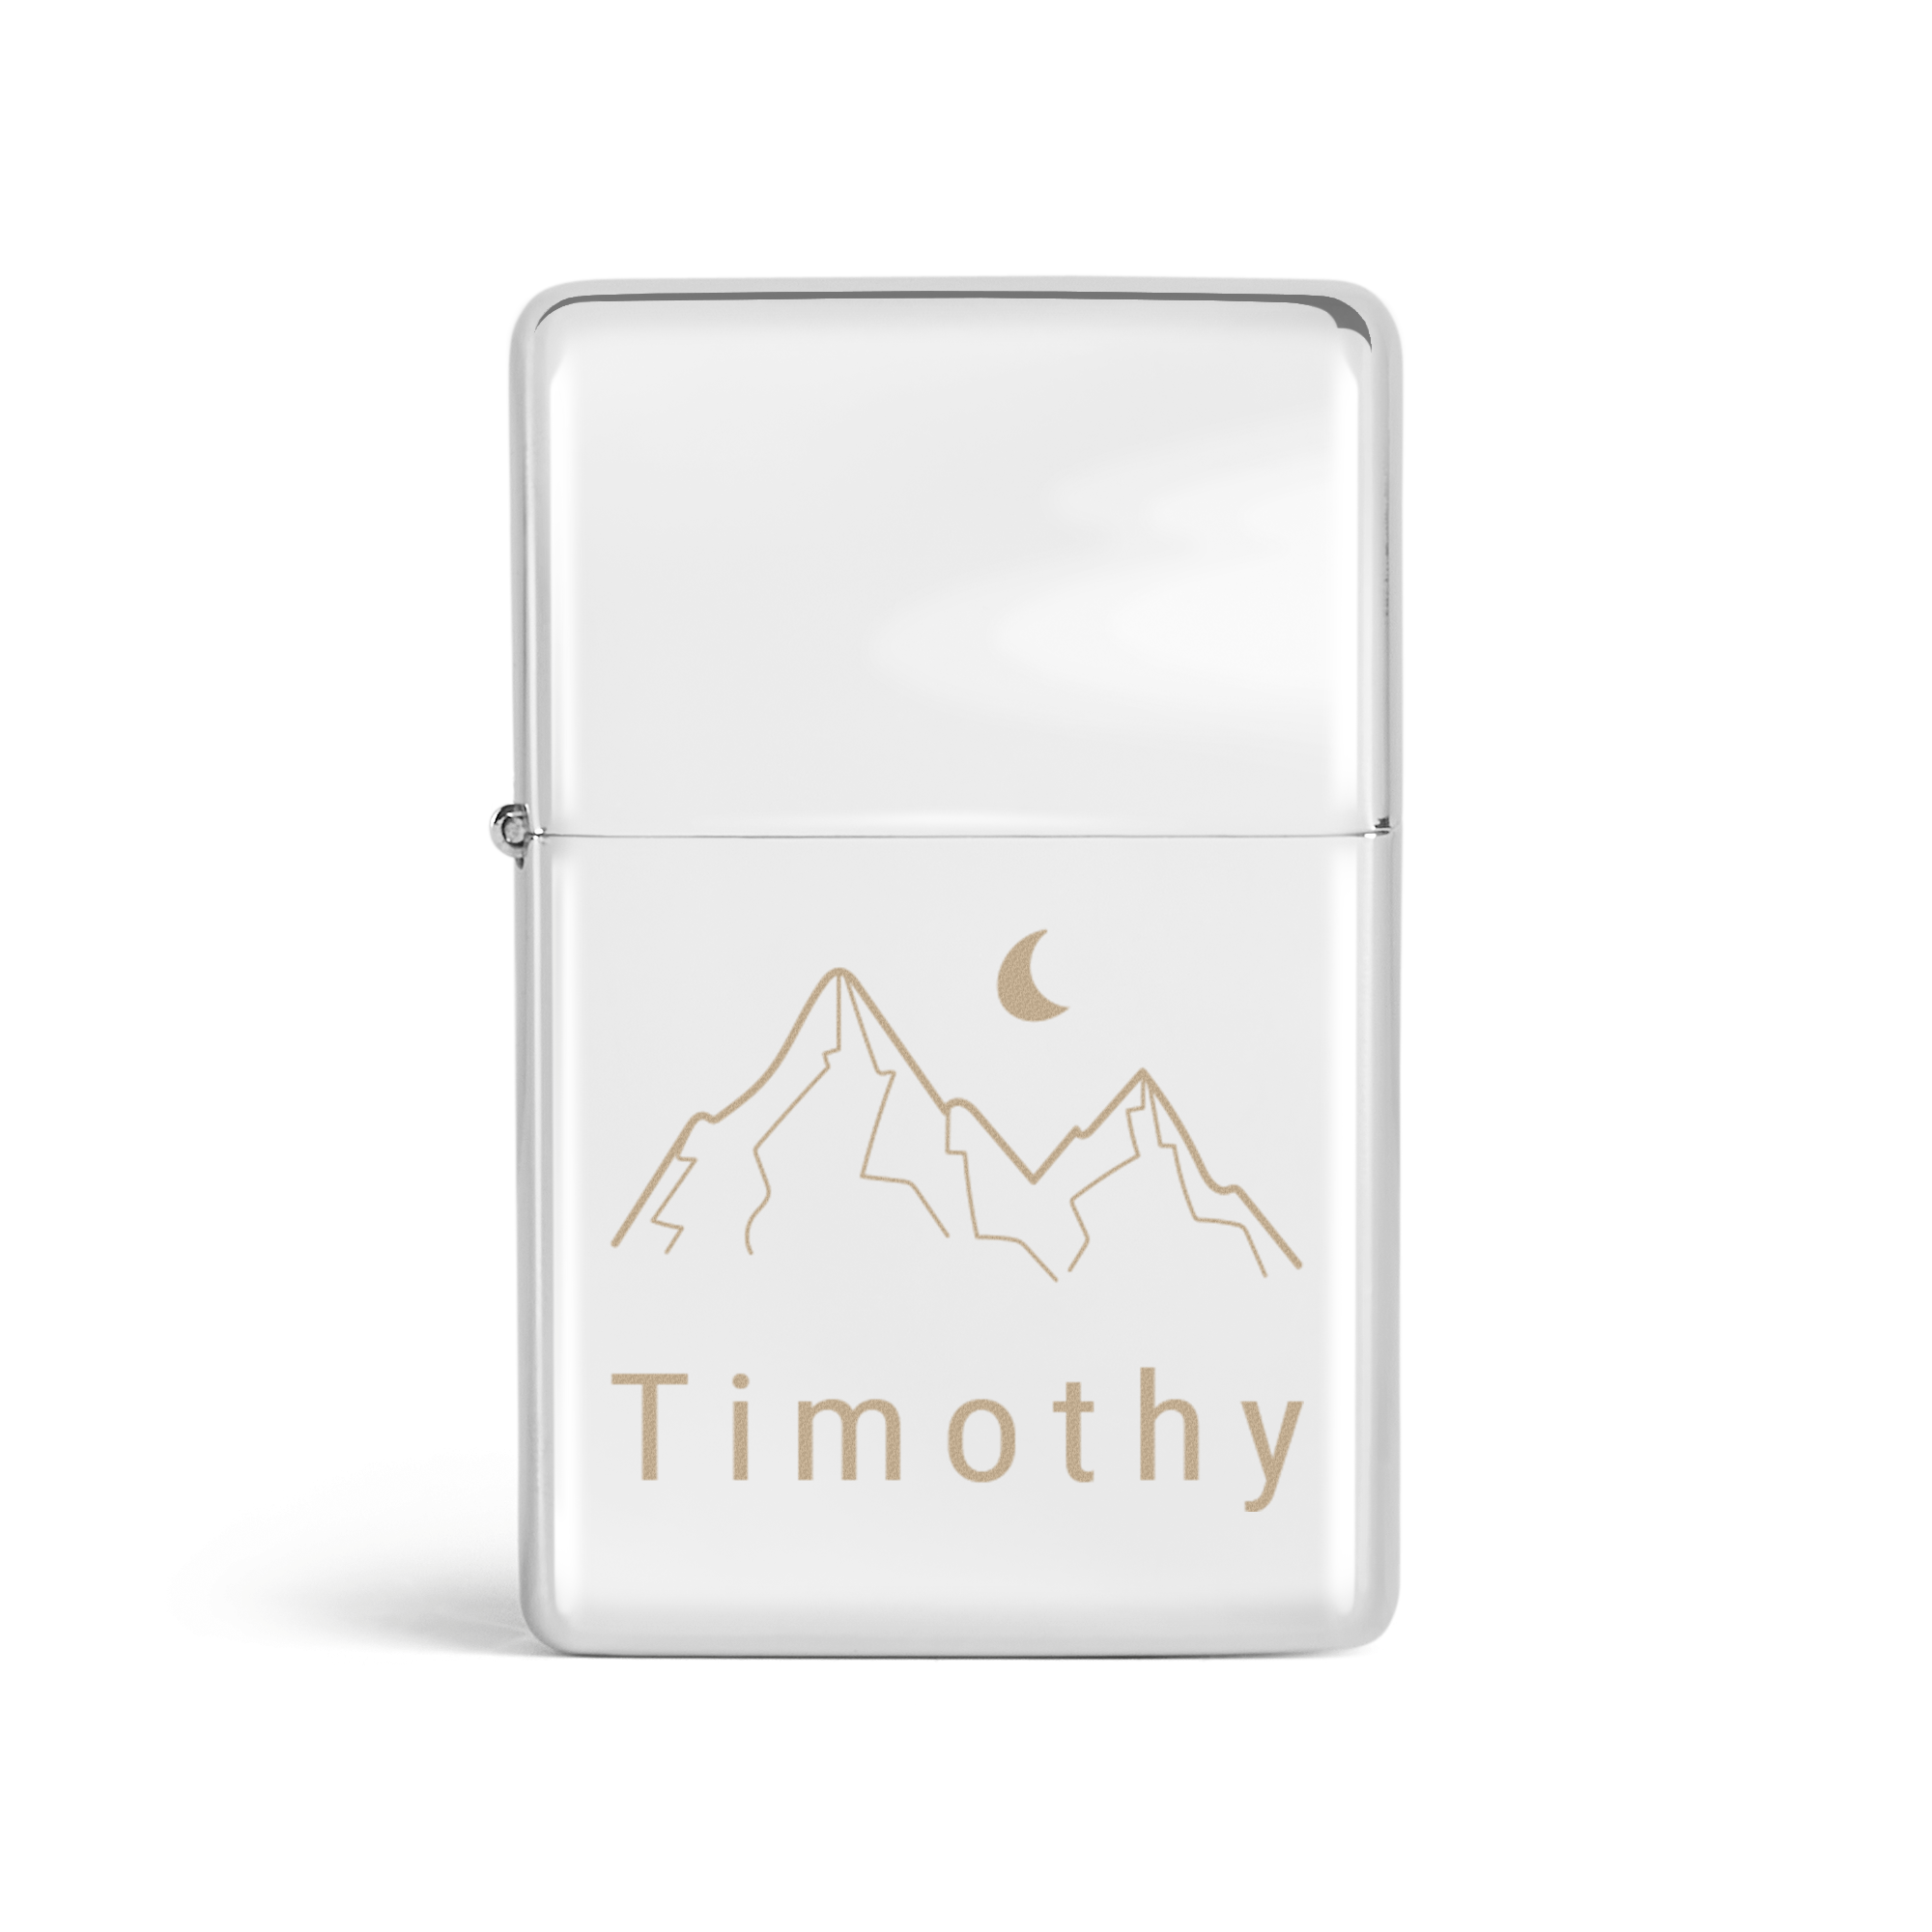 Personalised lighter - Engraved - Metal - Text